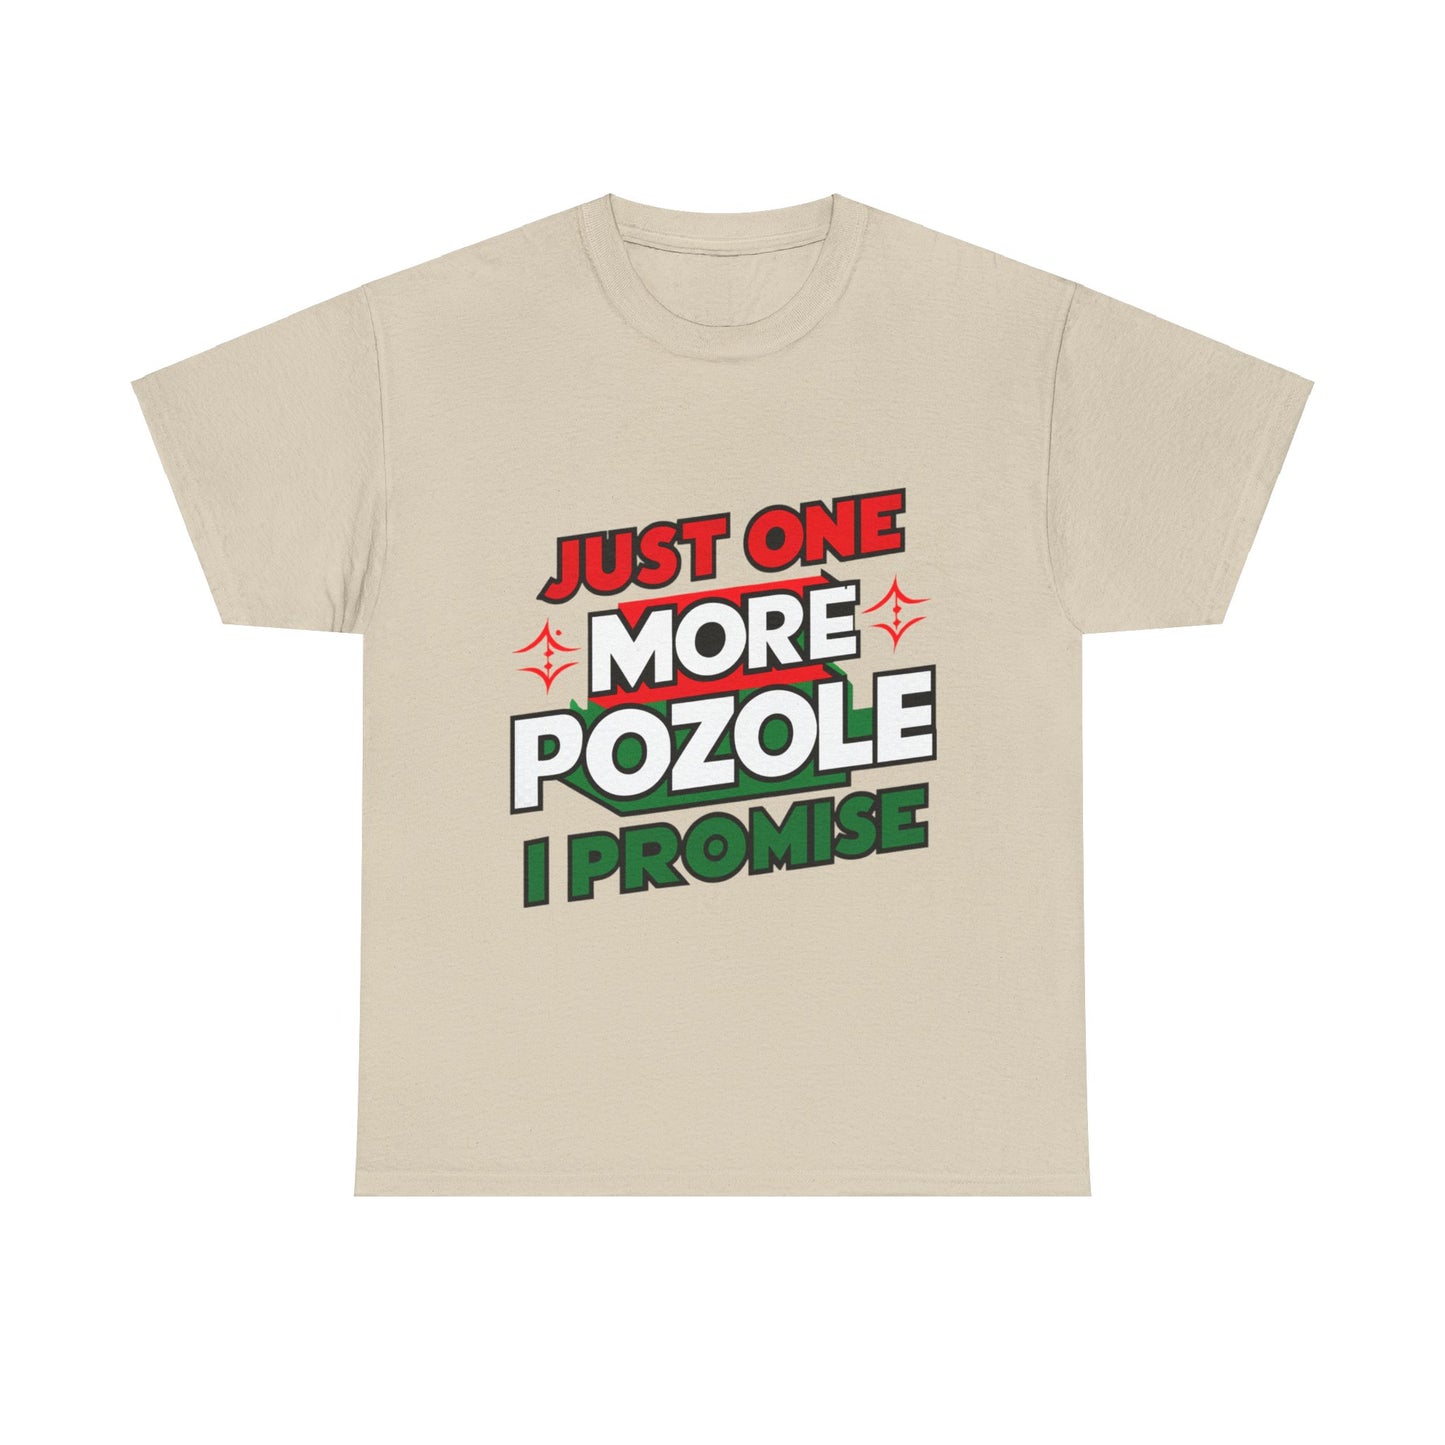 Just One More Pozole I Promise Mexican Food Graphic Unisex Heavy Cotton Tee Cotton Funny Humorous Graphic Soft Premium Unisex Men Women Sand T-shirt Birthday Gift-8